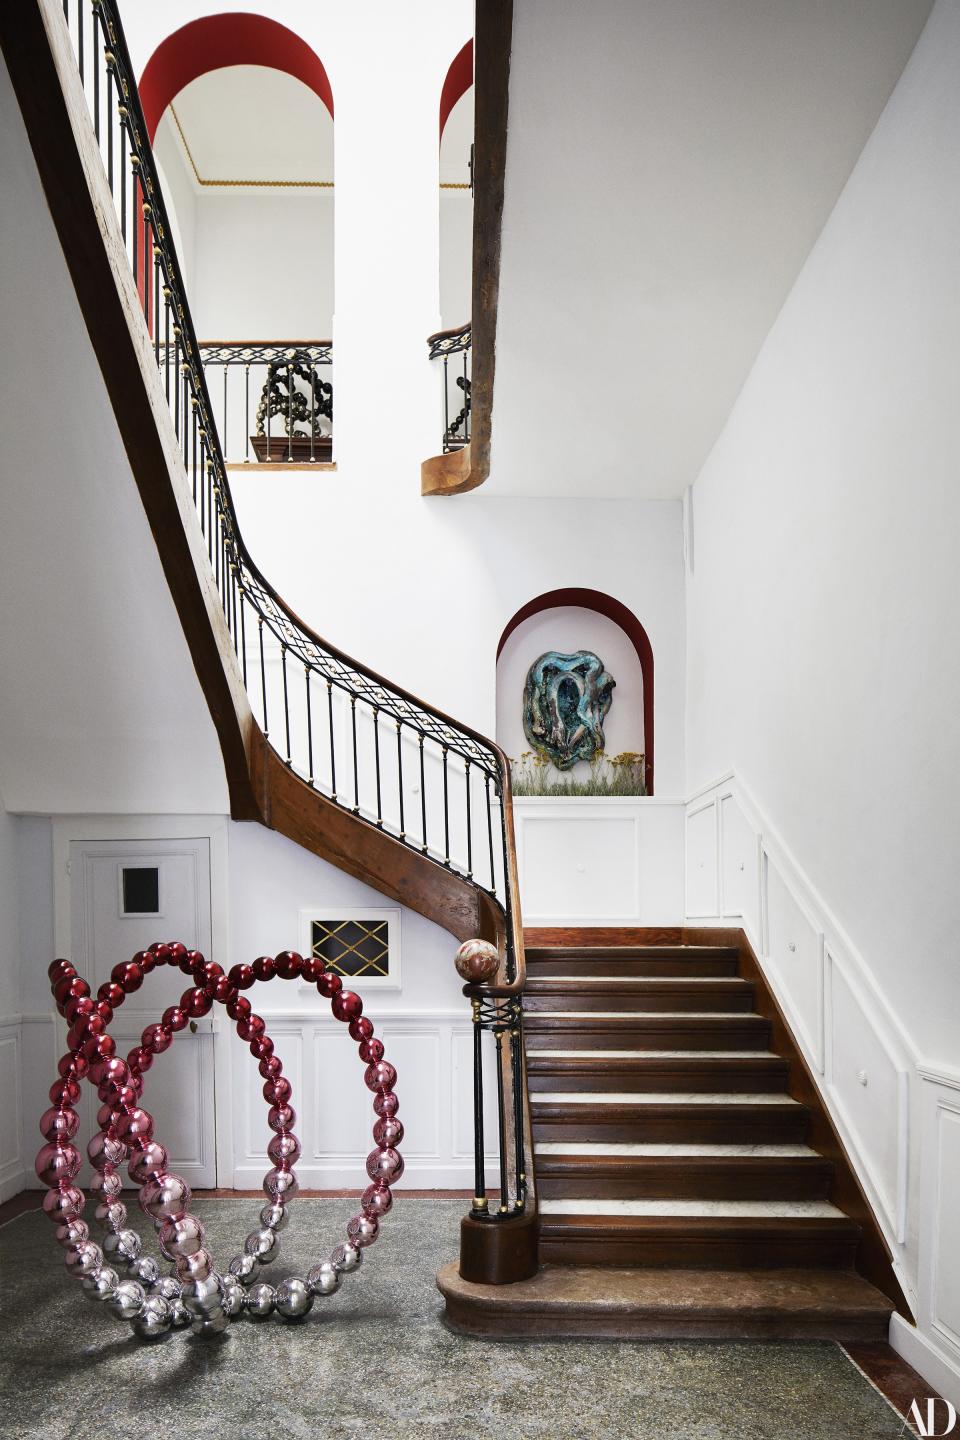 A glass–and–stainless steel sculpture by Othoniel stands at the foot of the stairway; glazed stoneware sculpture by Creten in arched niche.